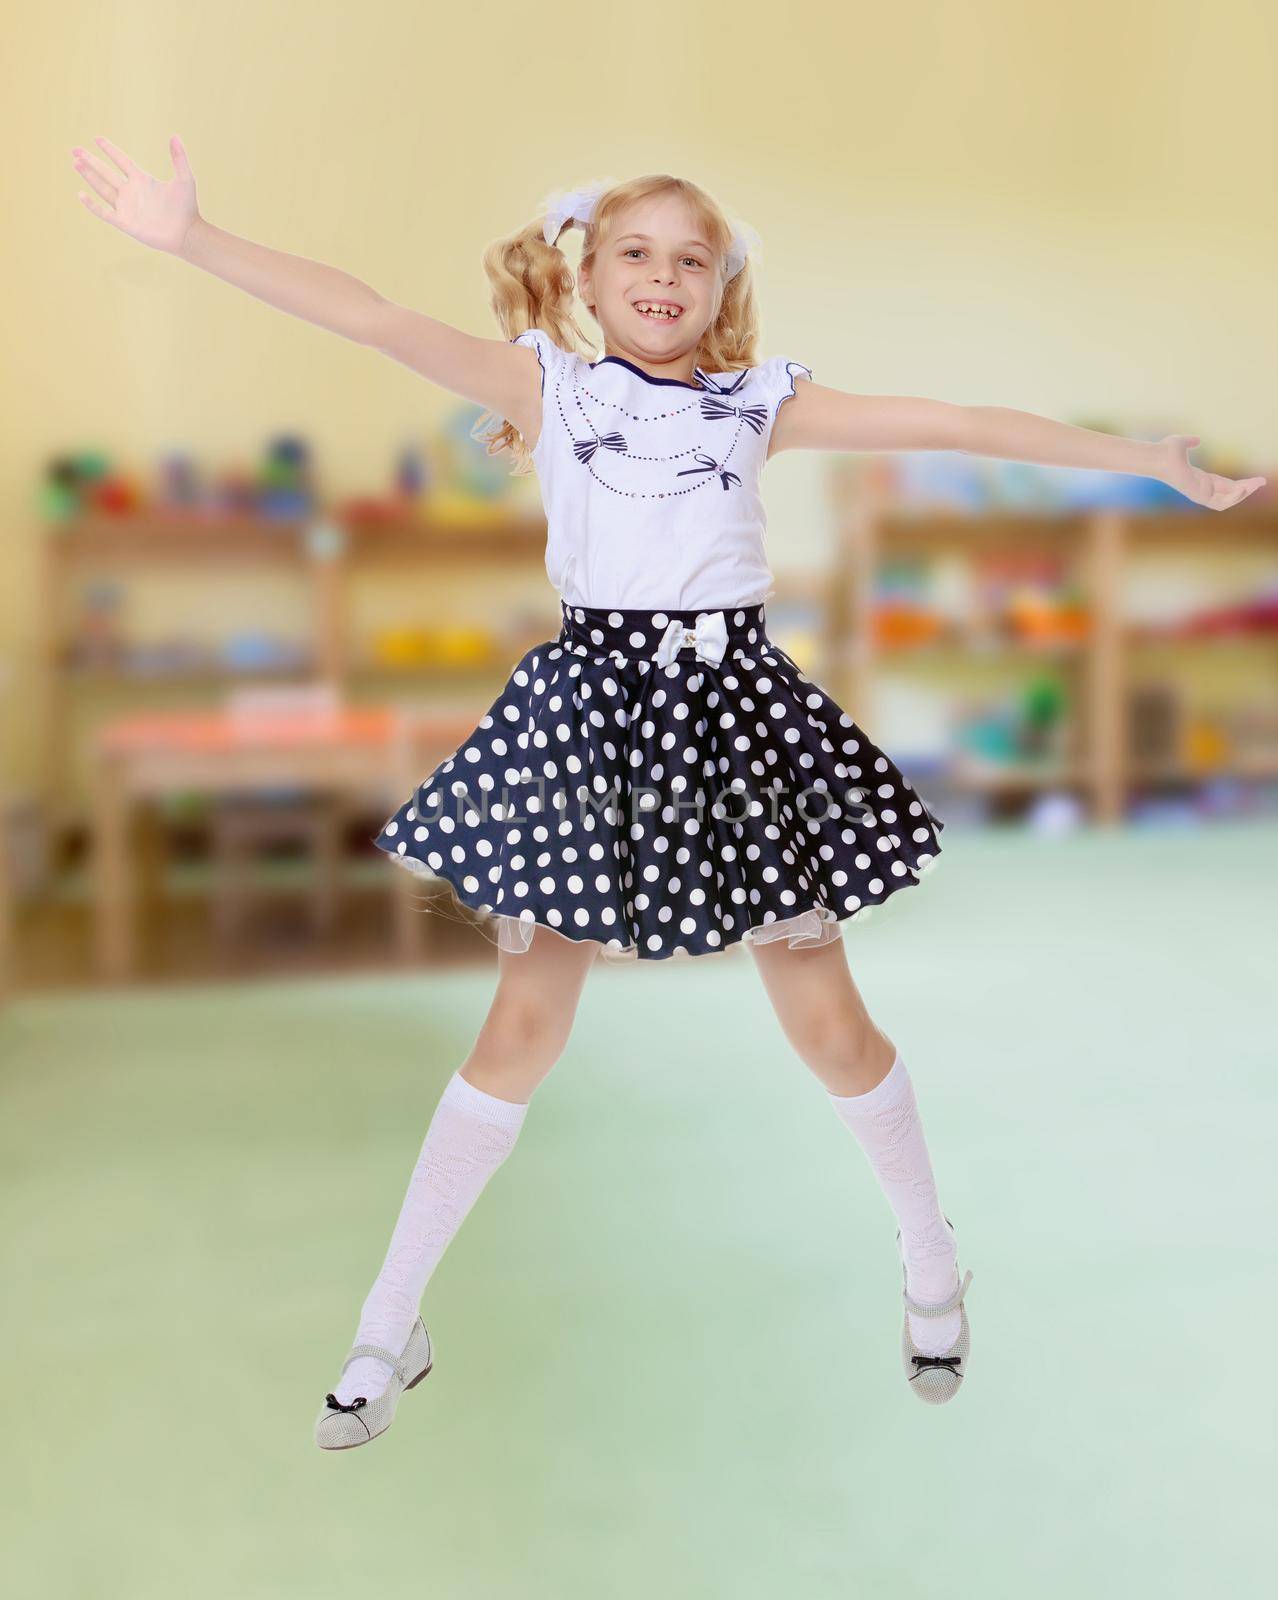 Happy little girl in the short polka-dot dress jumps , spread wide his arms and legs.In the background children's room where there are shelves with toys.